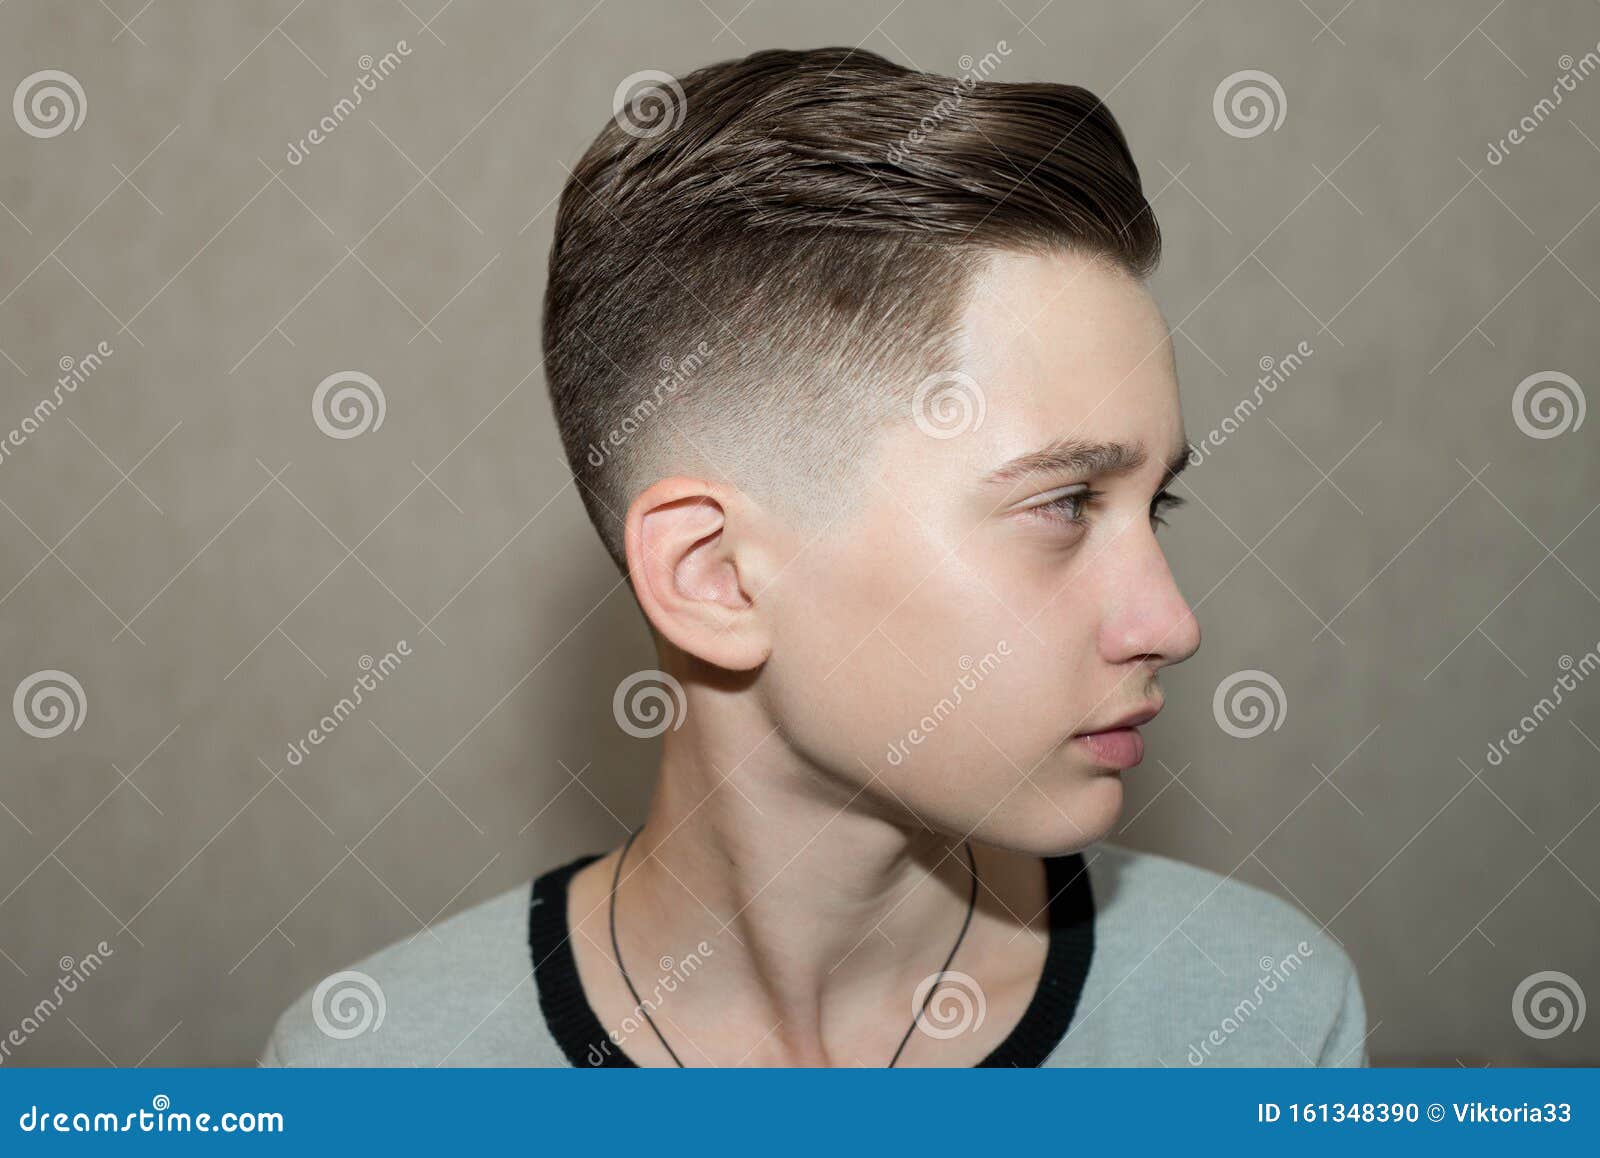 55 Amazing Mid Fade Haircuts For Men (2022 Collection) - Hairmanz